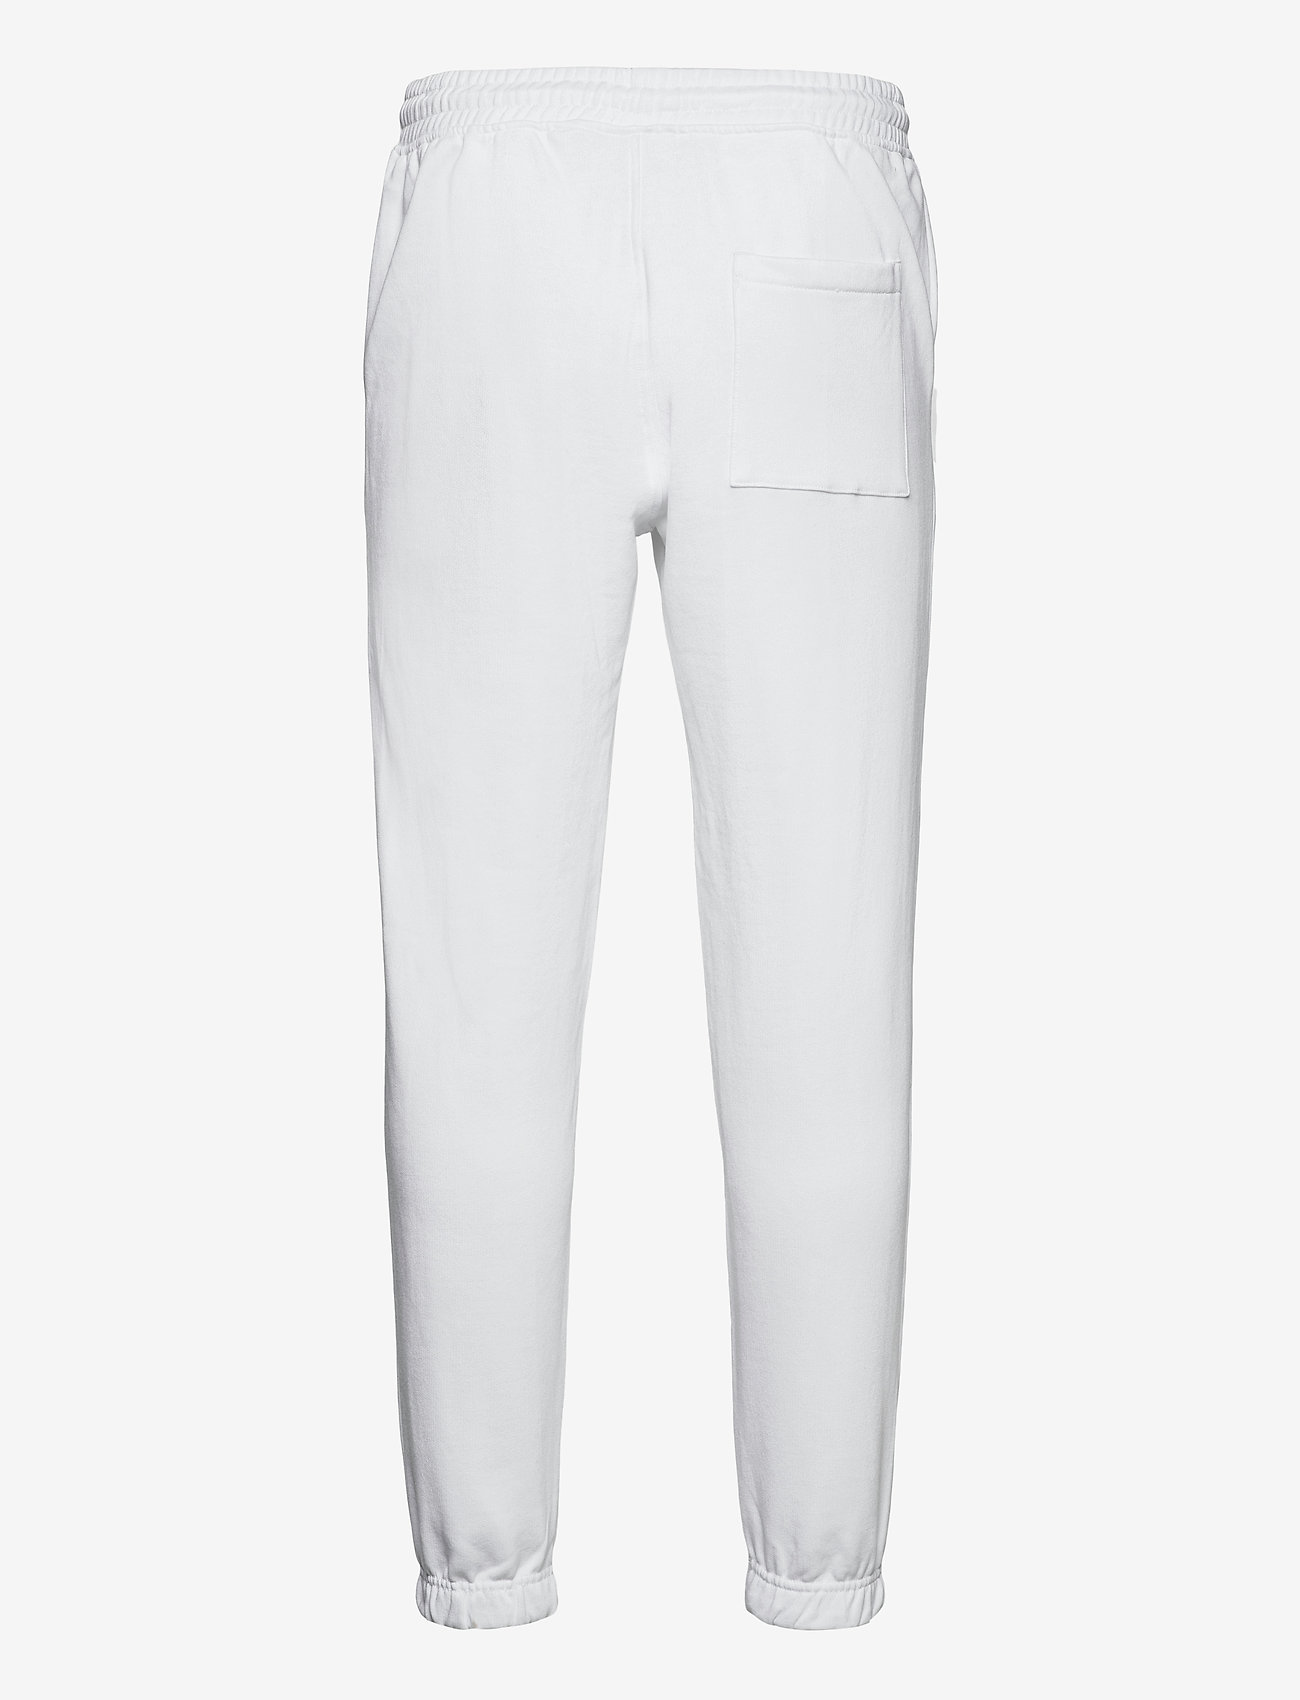 Hanger by Holzweiler - Hanger Trousers - sweatpants - white - 1